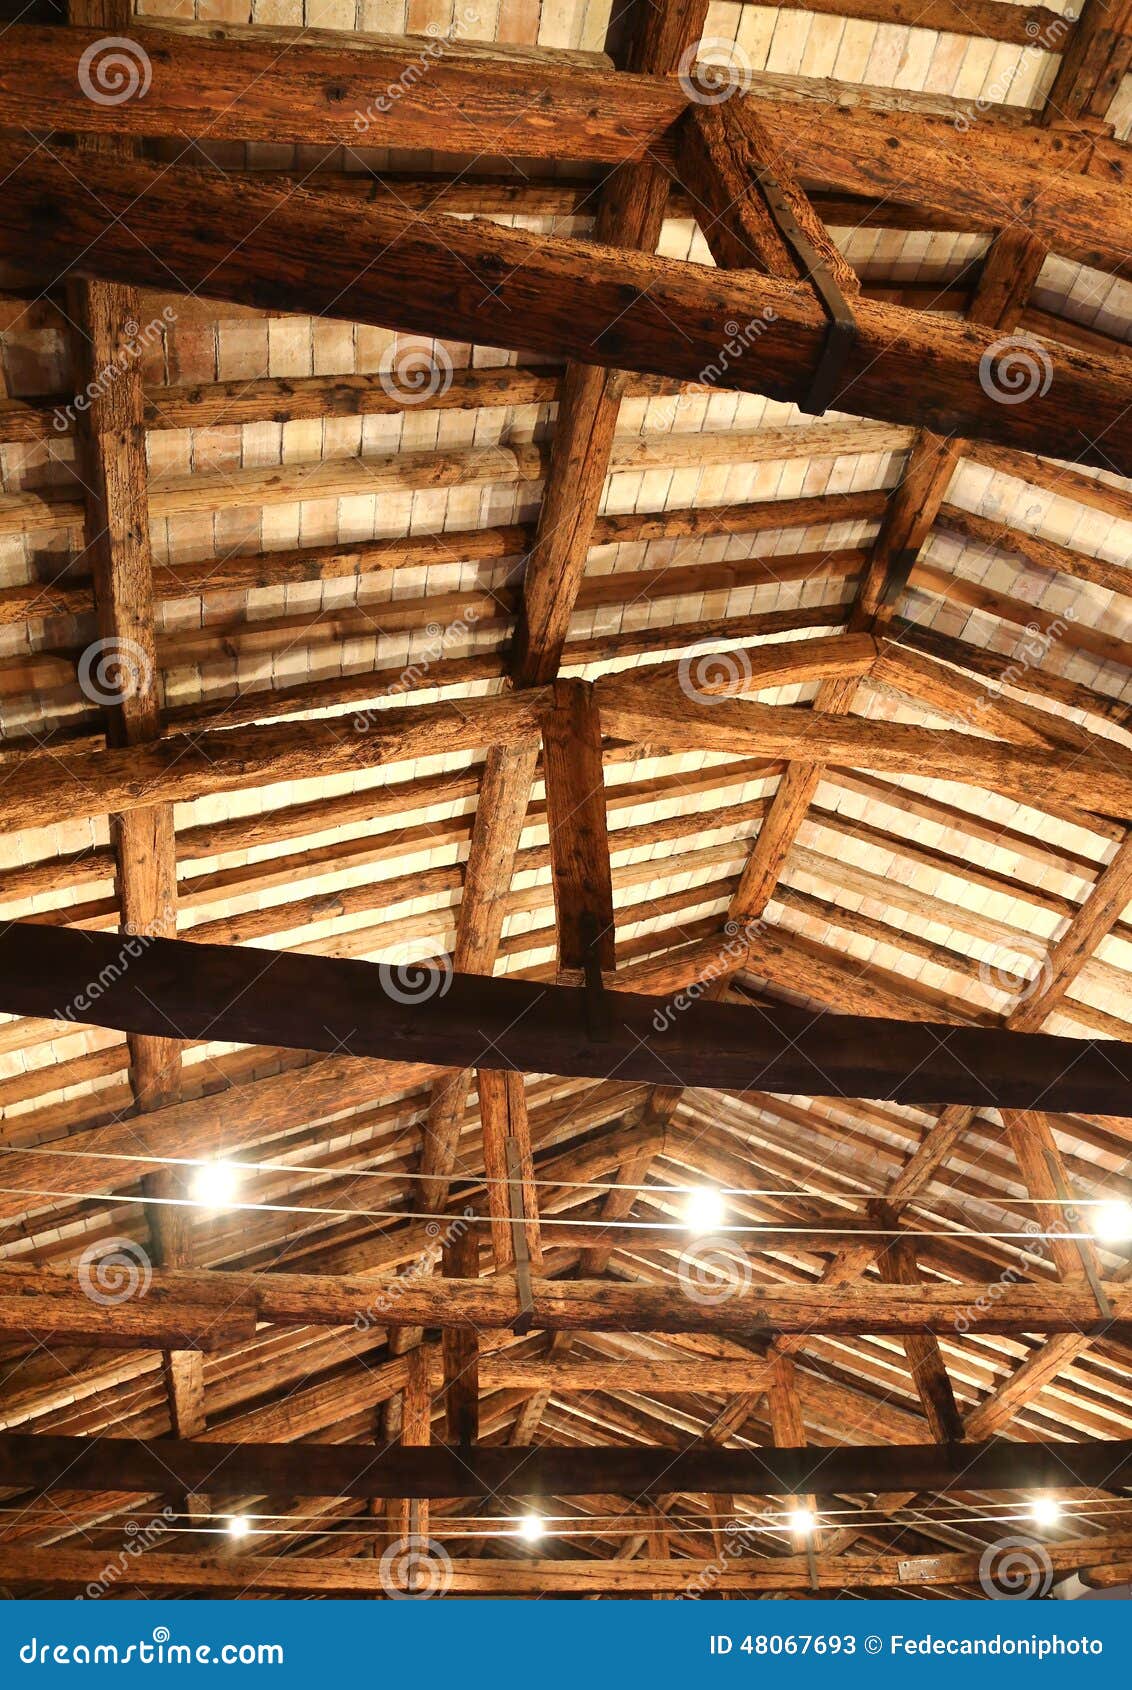 restored roof with wooden beams and the lamps